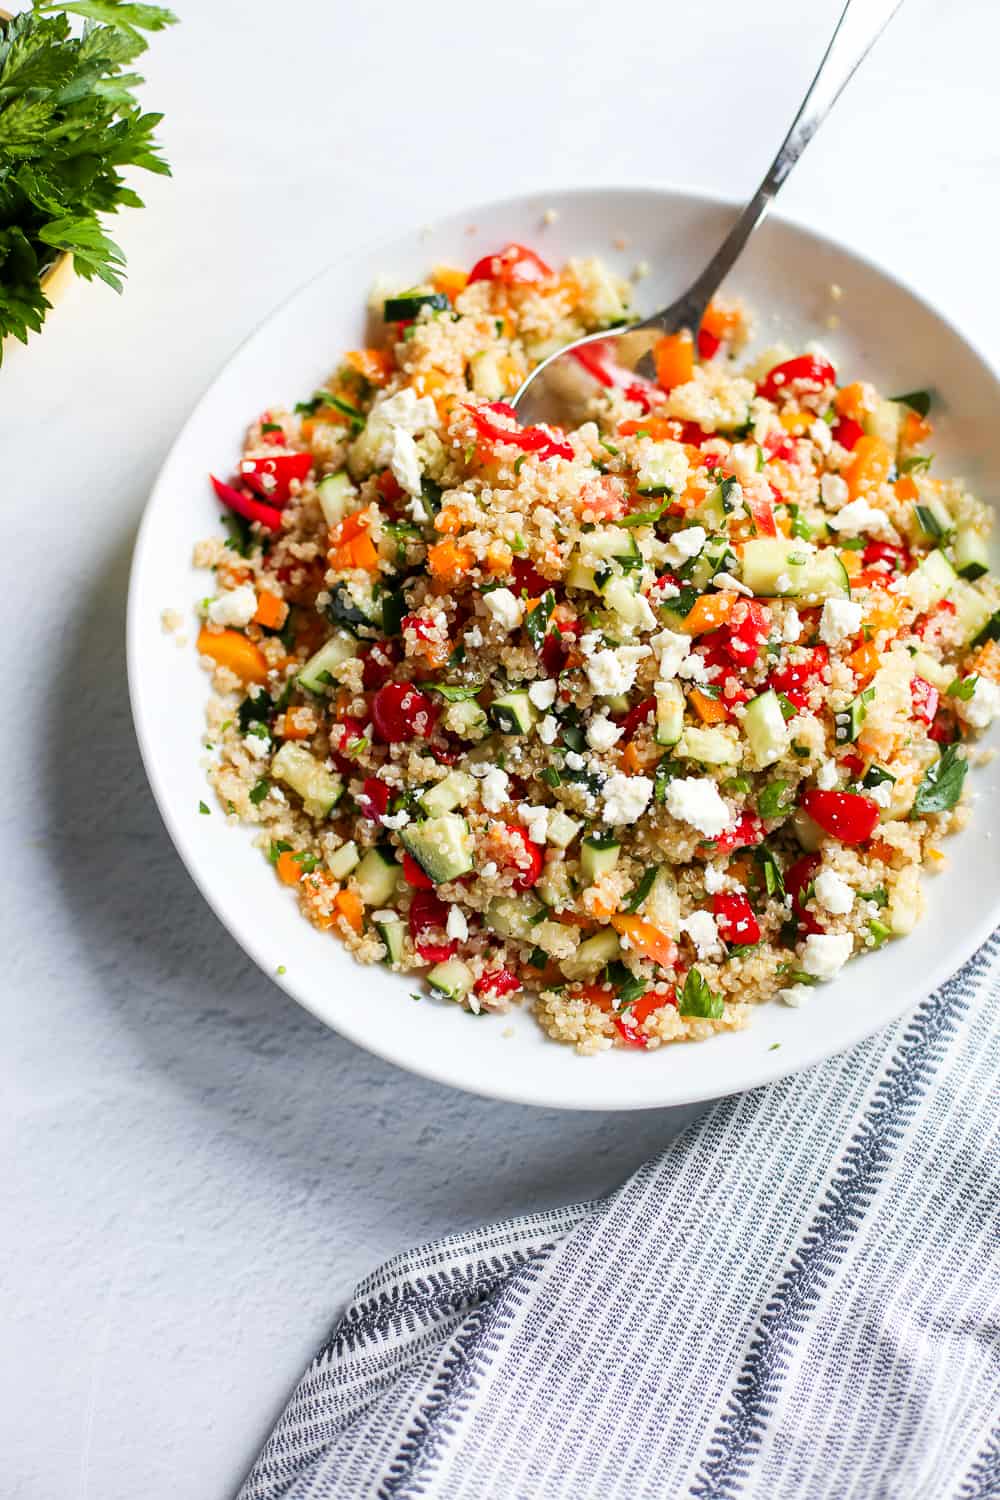 Quinoa tabbouleh salad with a serving spoon in a white bowl.